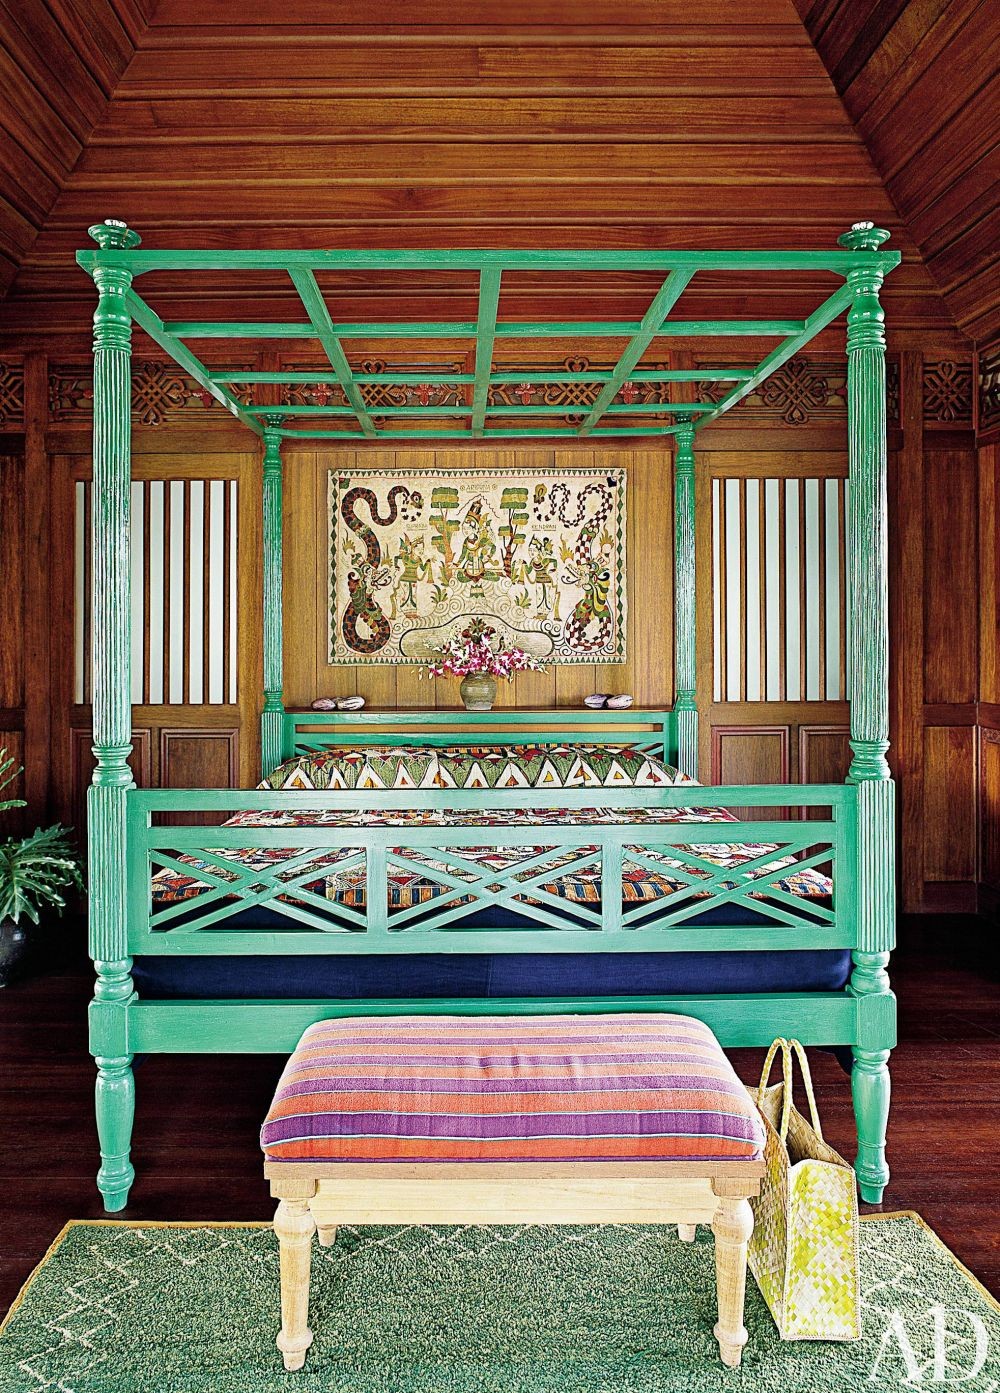 Eccentric-minty-four-poster-bed-